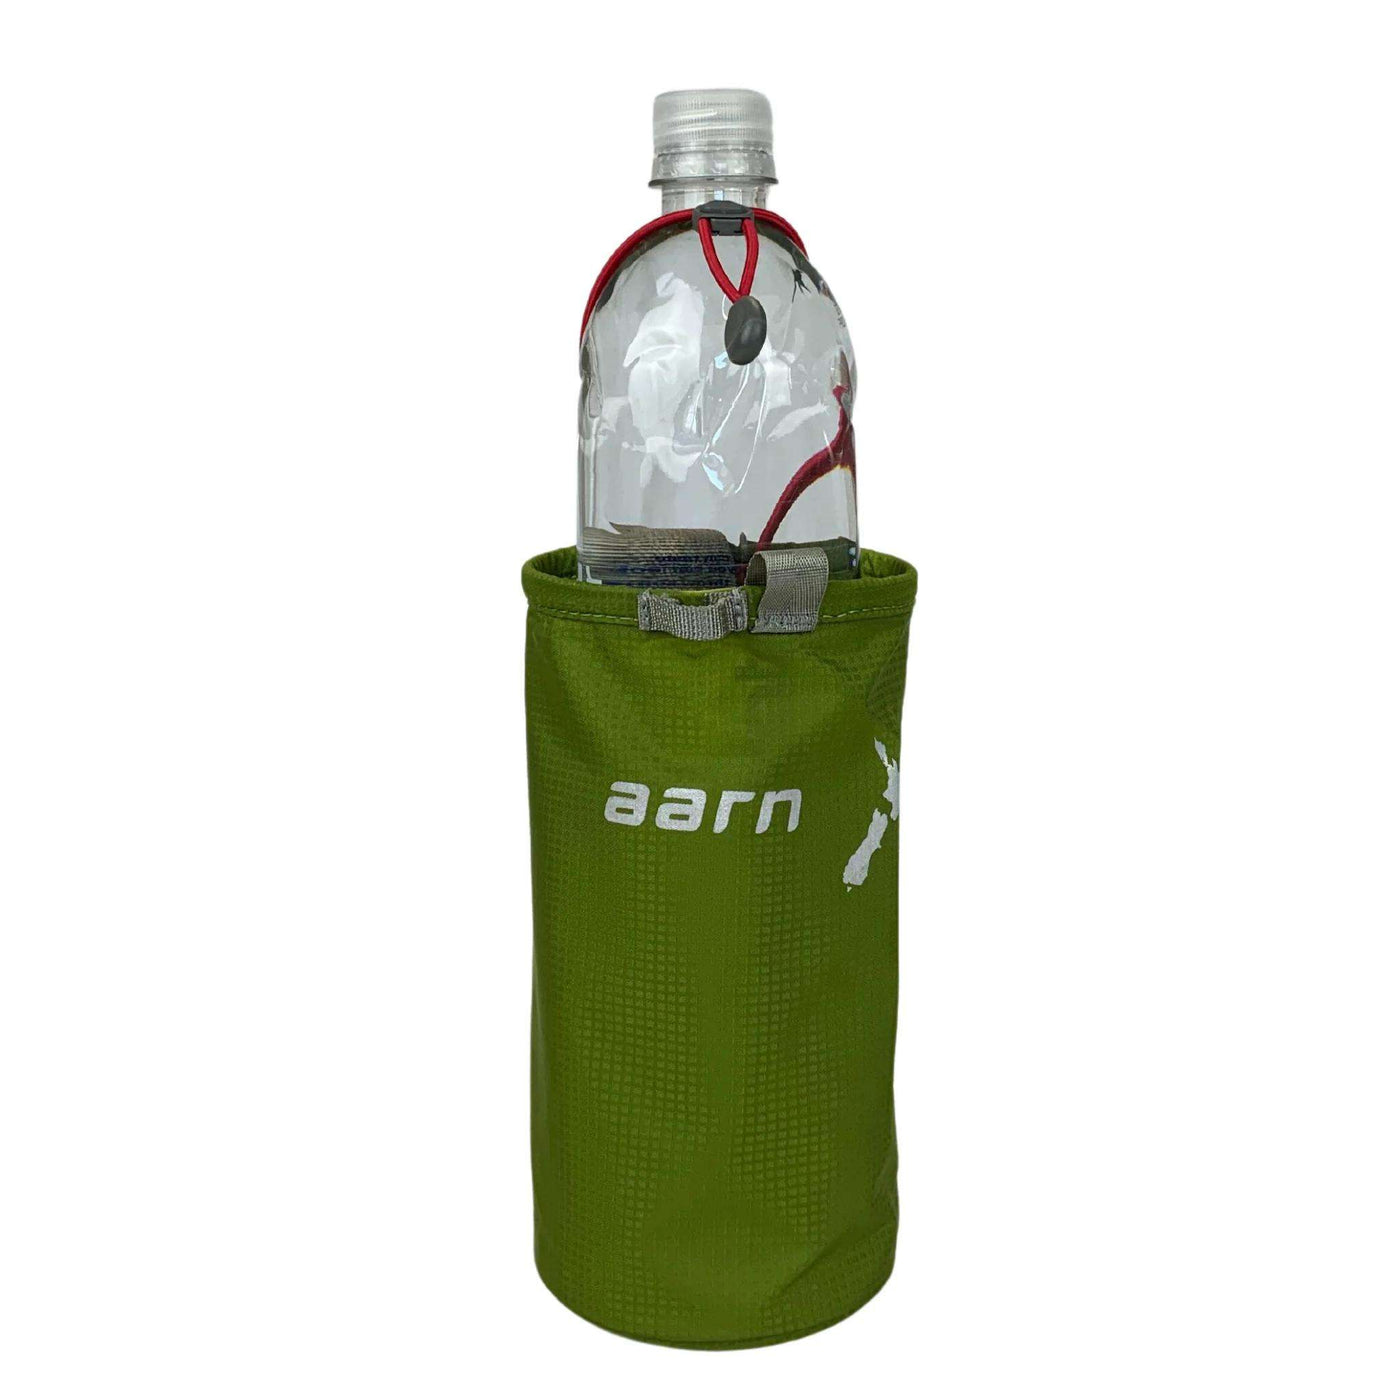 Aarn Water Bottle Holder | Aarn Pack Accessories | Further Faster Christchurch NZ